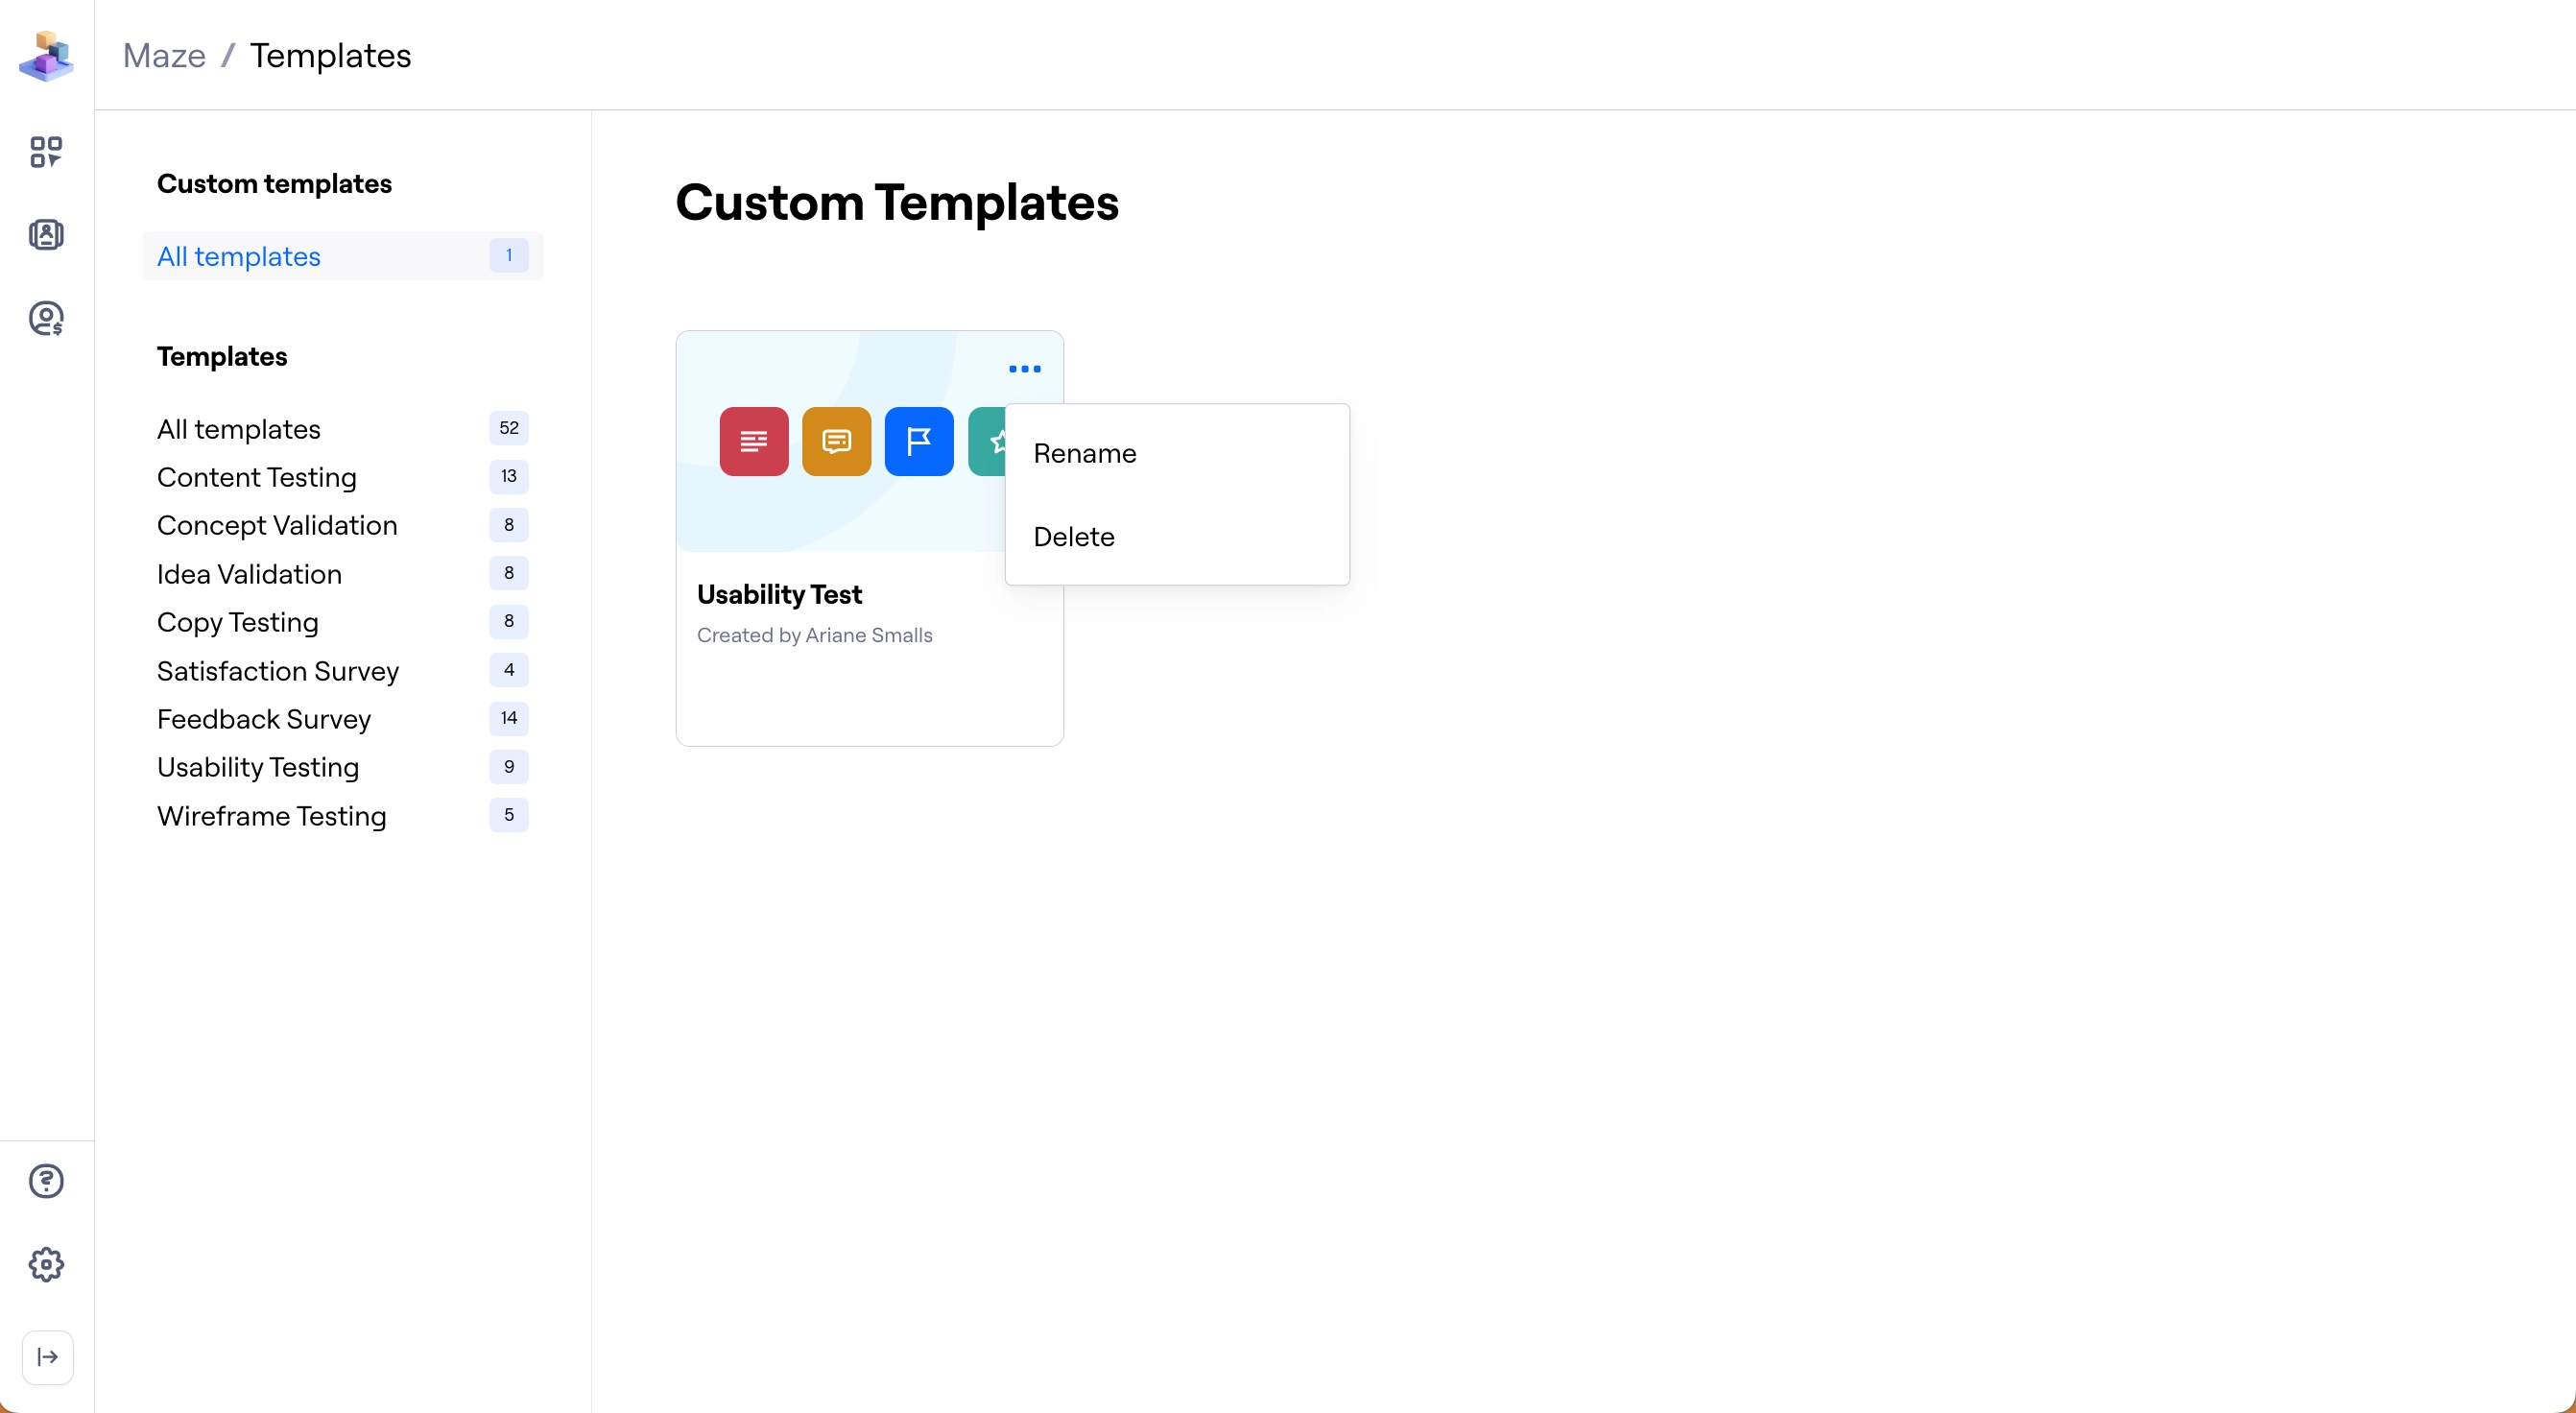 Options to delete or rename a custom template